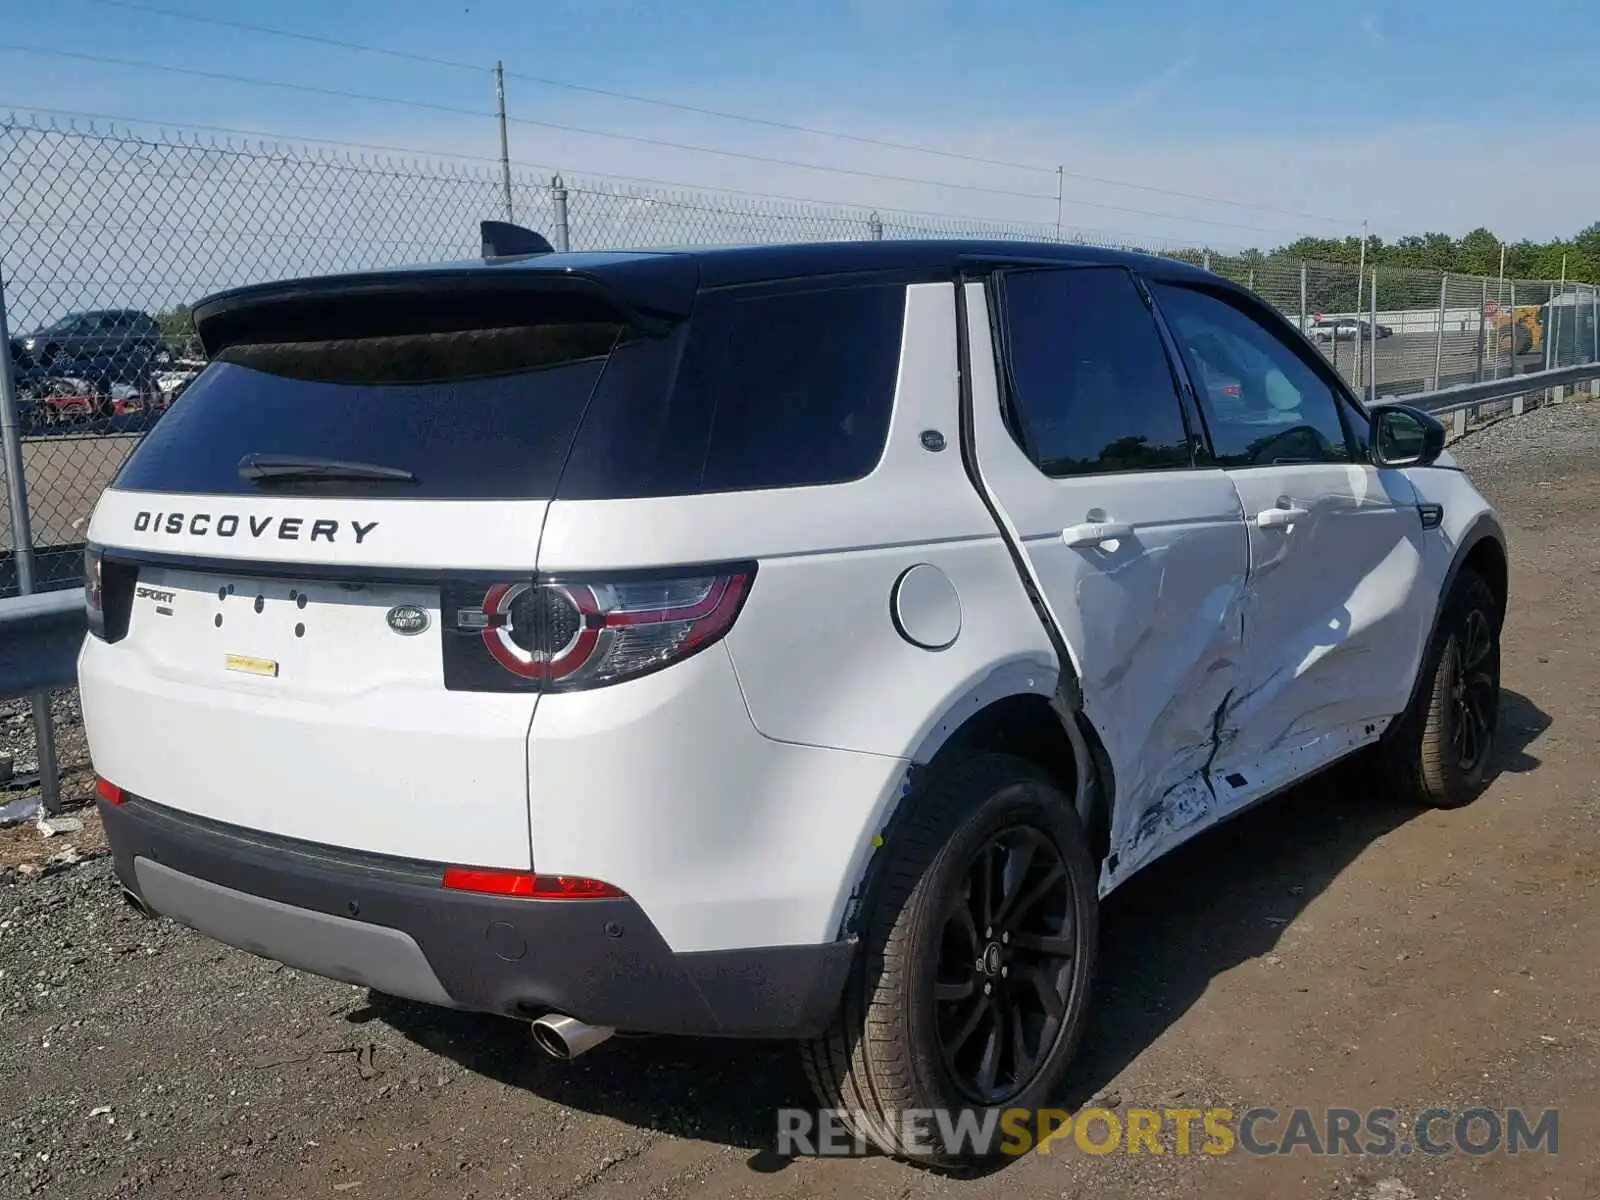 4 Photograph of a damaged car SALCR2FX2KH801061 LAND ROVER DISCOVERY 2019